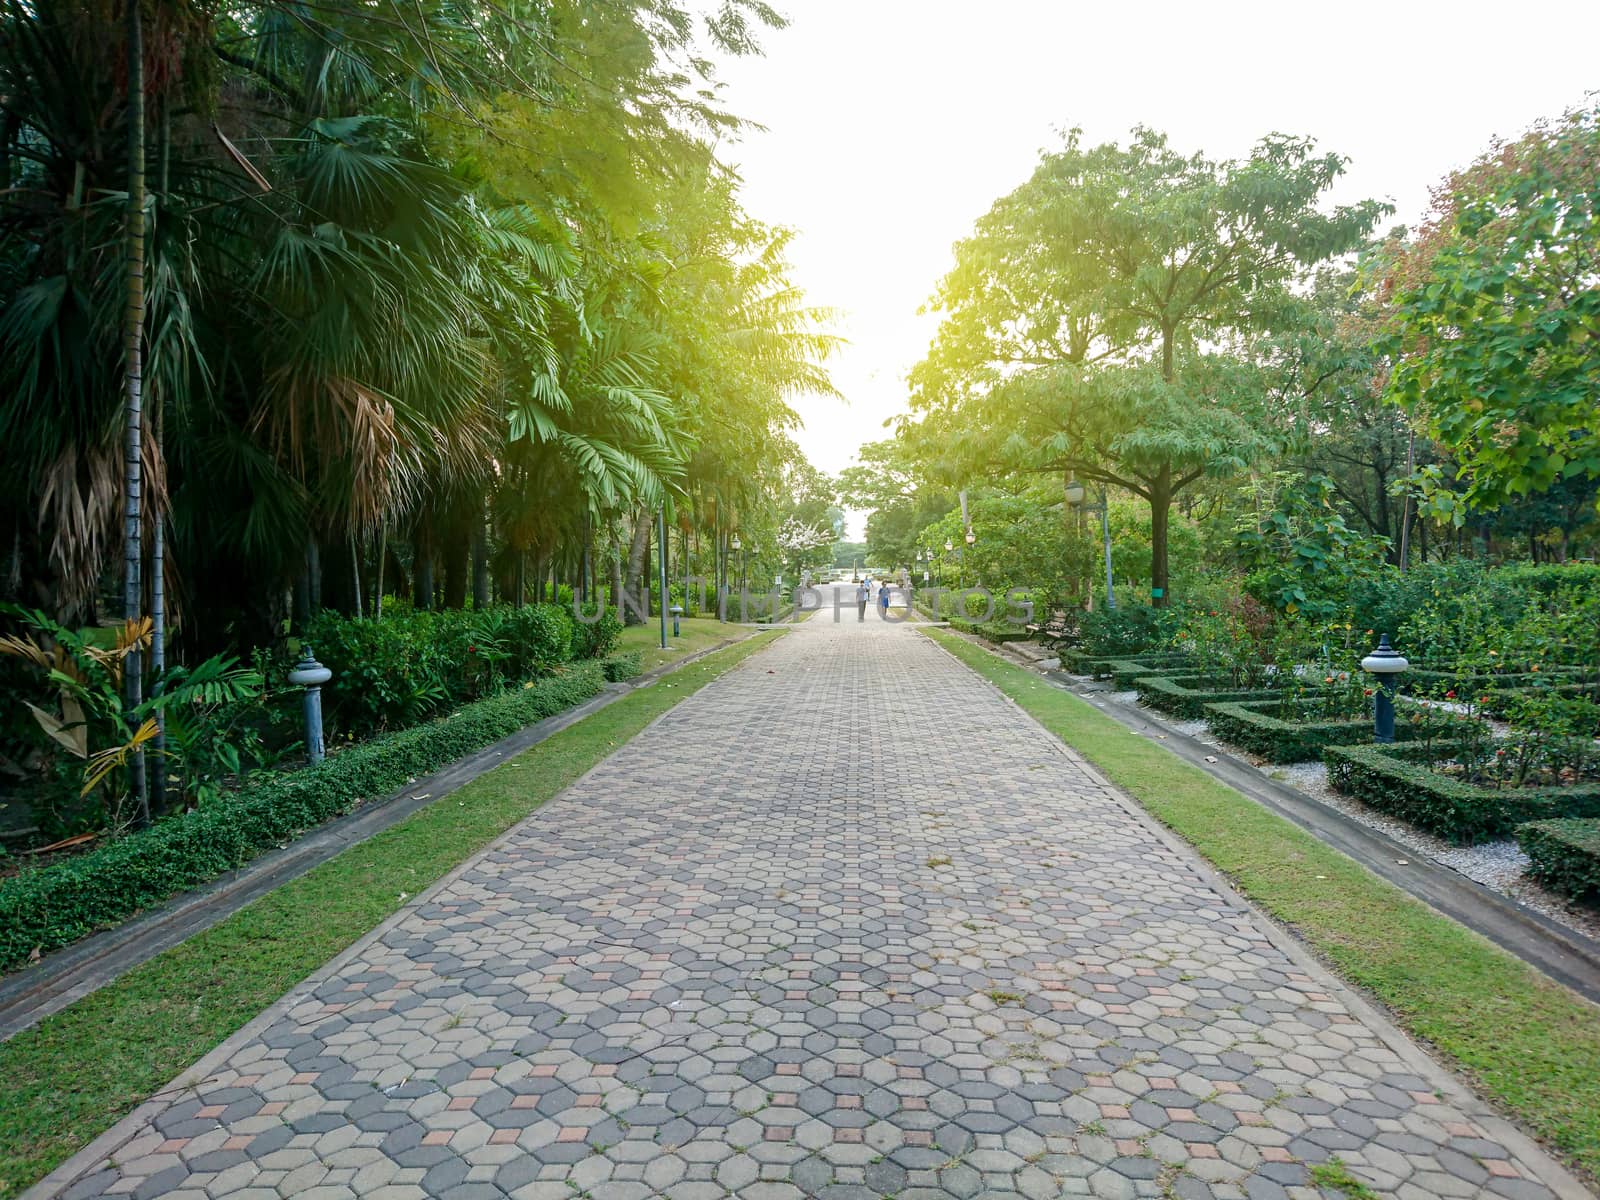 Stone brick way in the park with sunlight